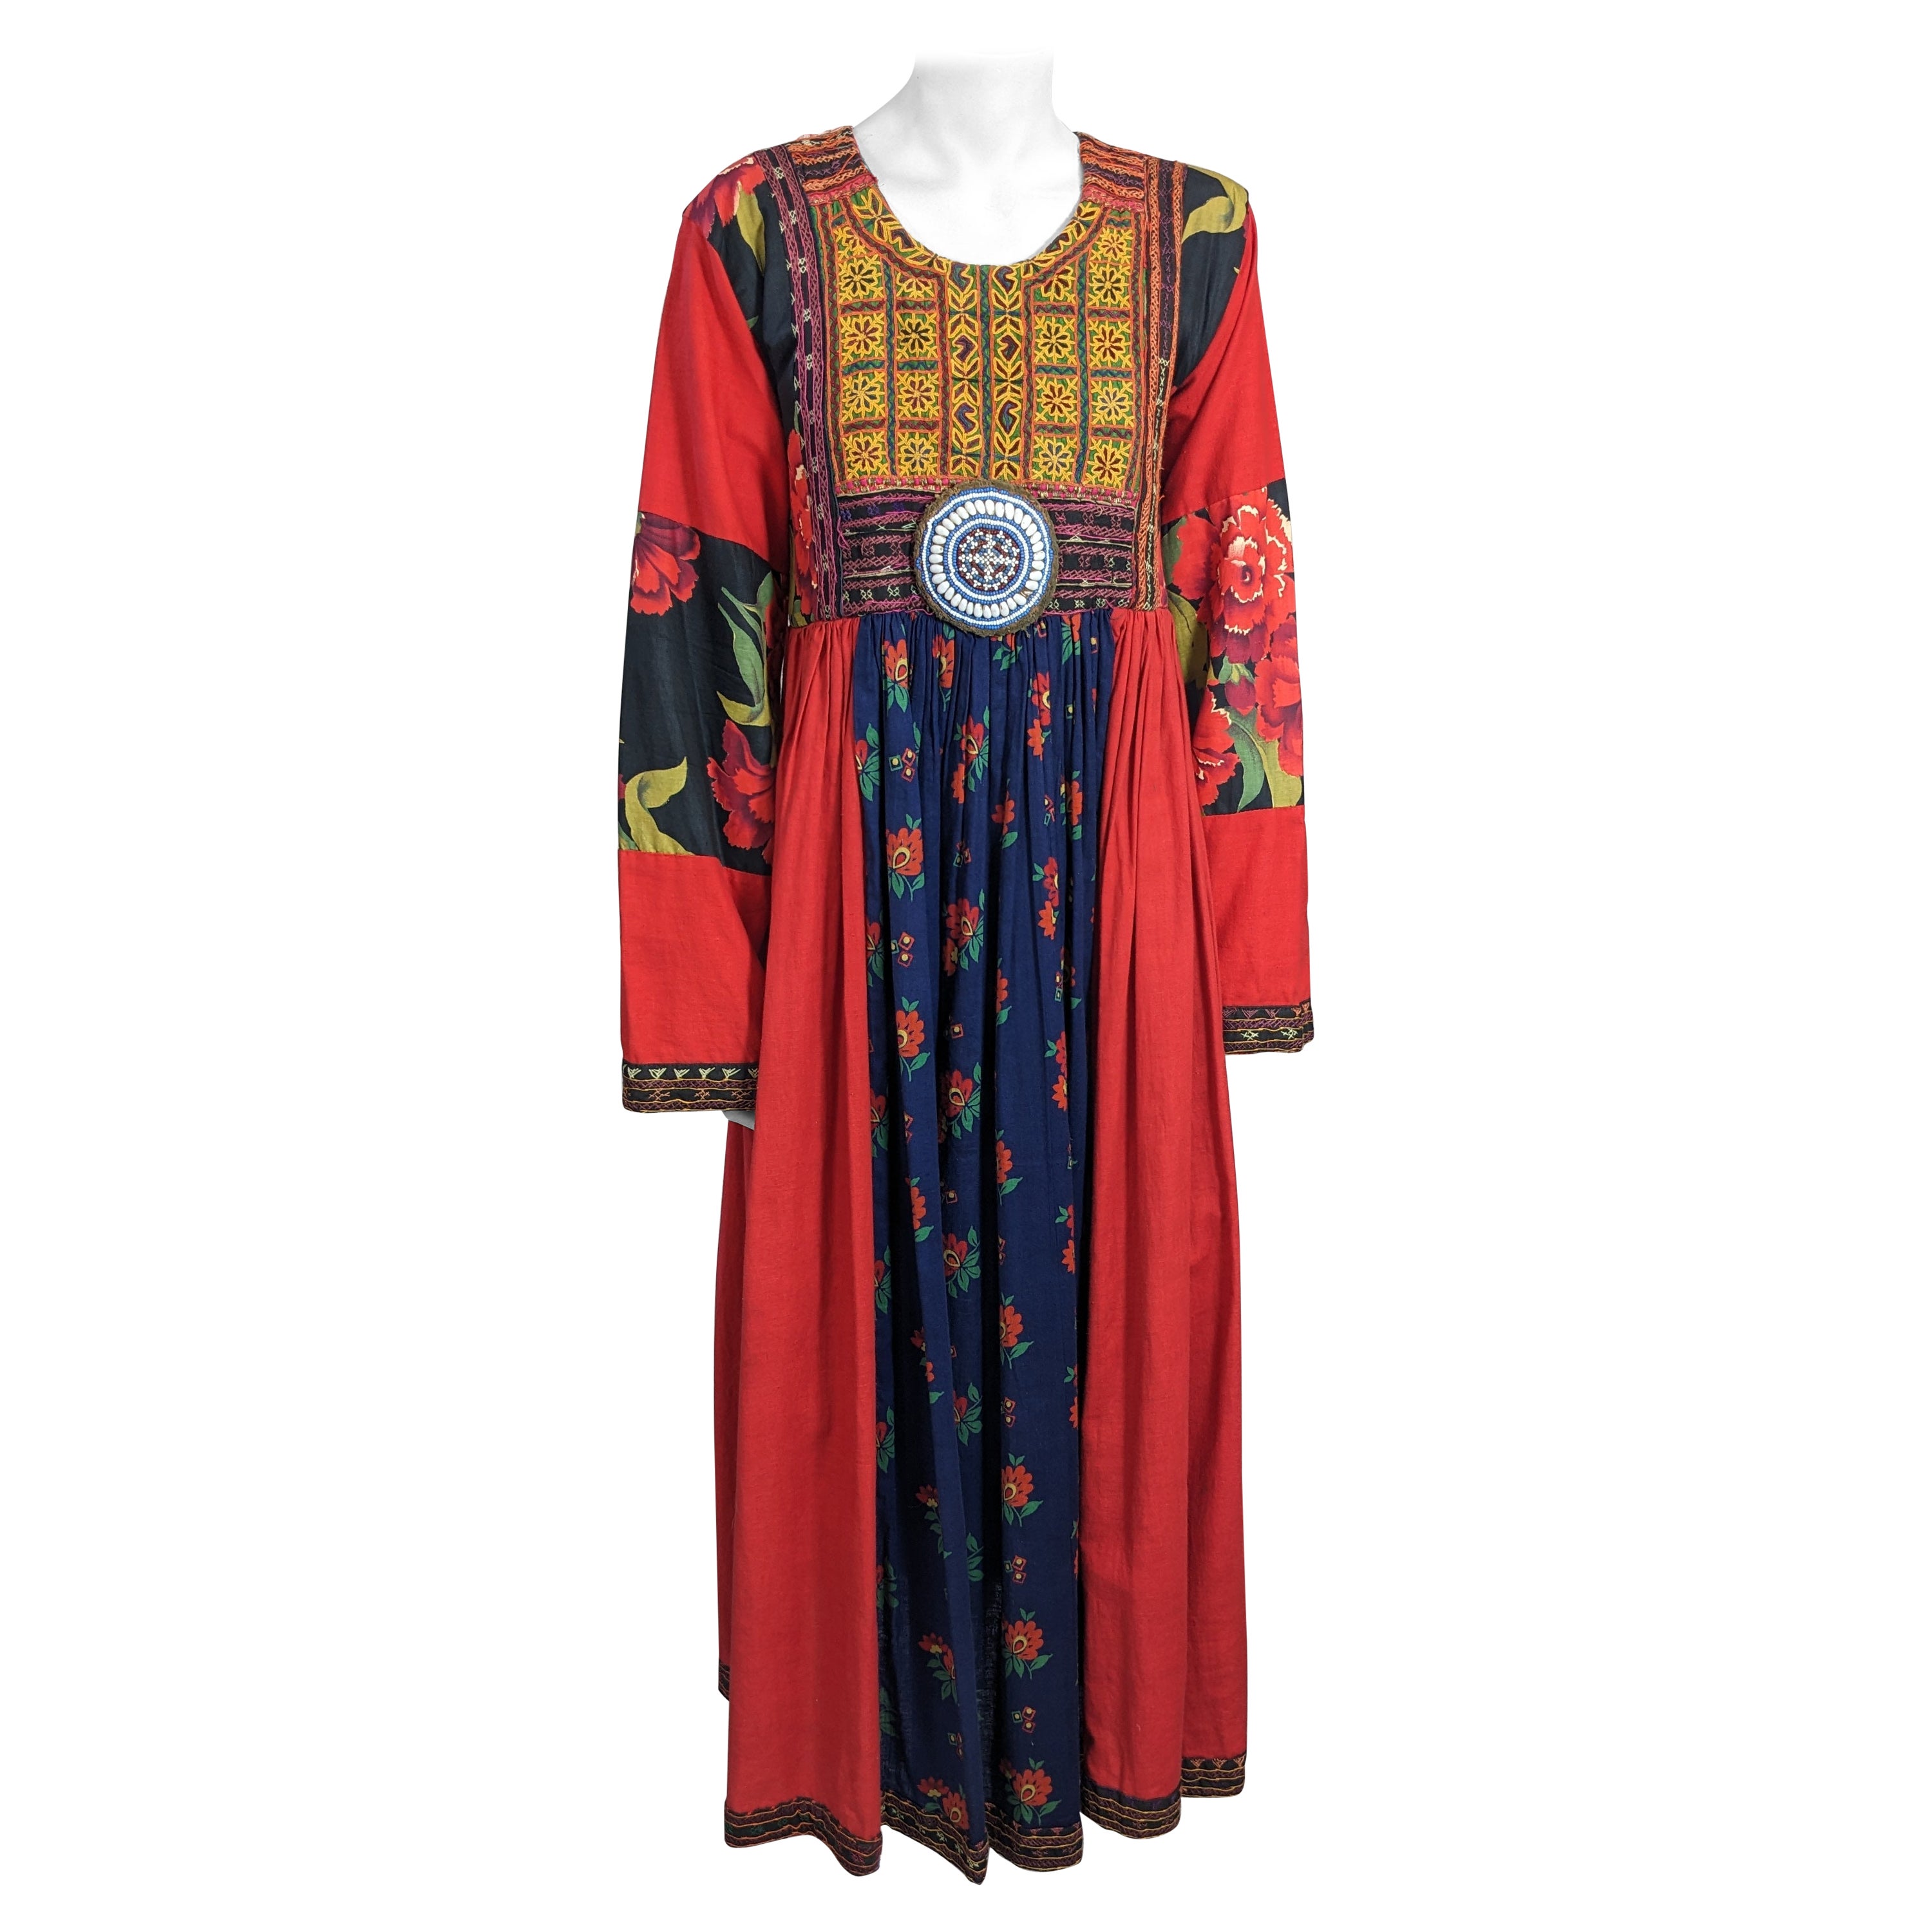 What are Afghan dresses called?